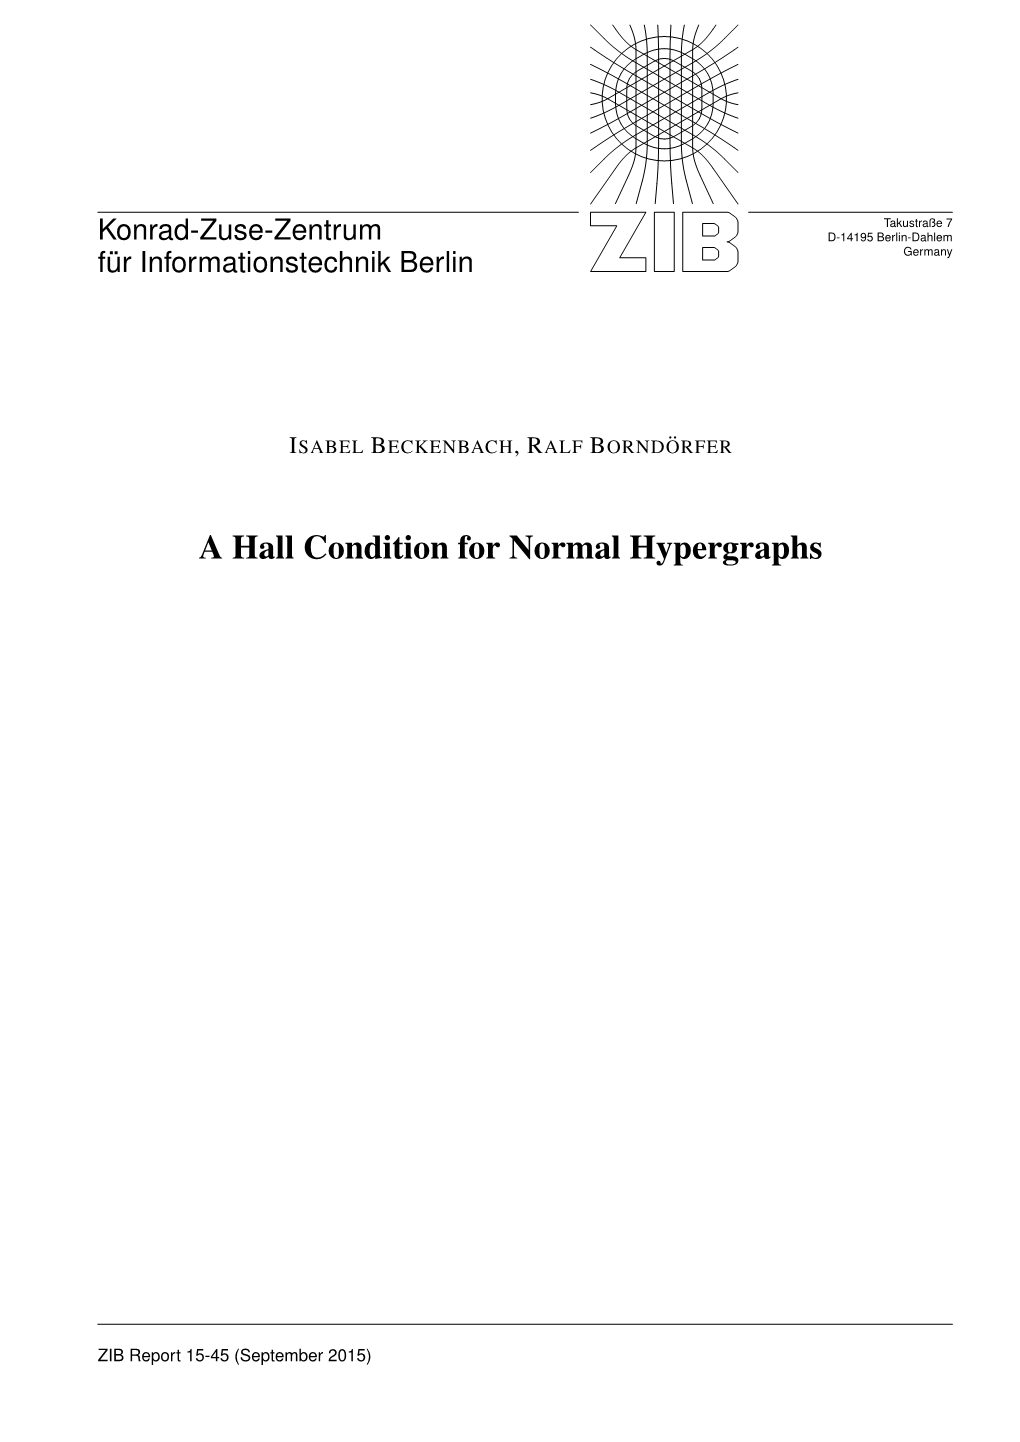 A Hall Condition for Normal Hypergraphs